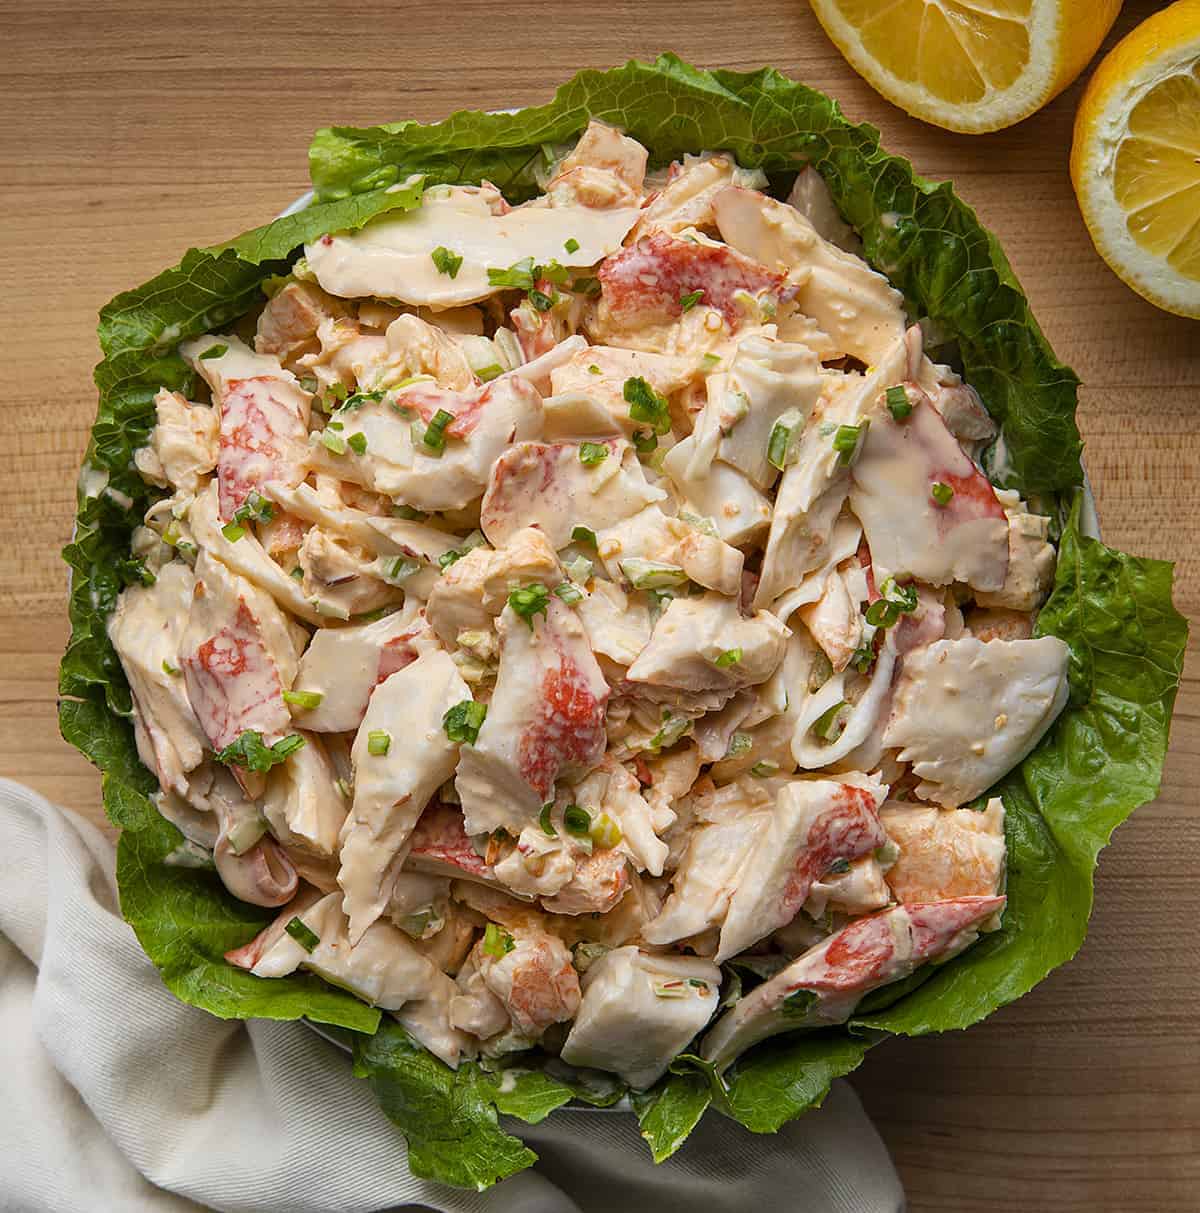 Overhead View of Crab Louis in a Bowl with Lettuce and Towel Near By